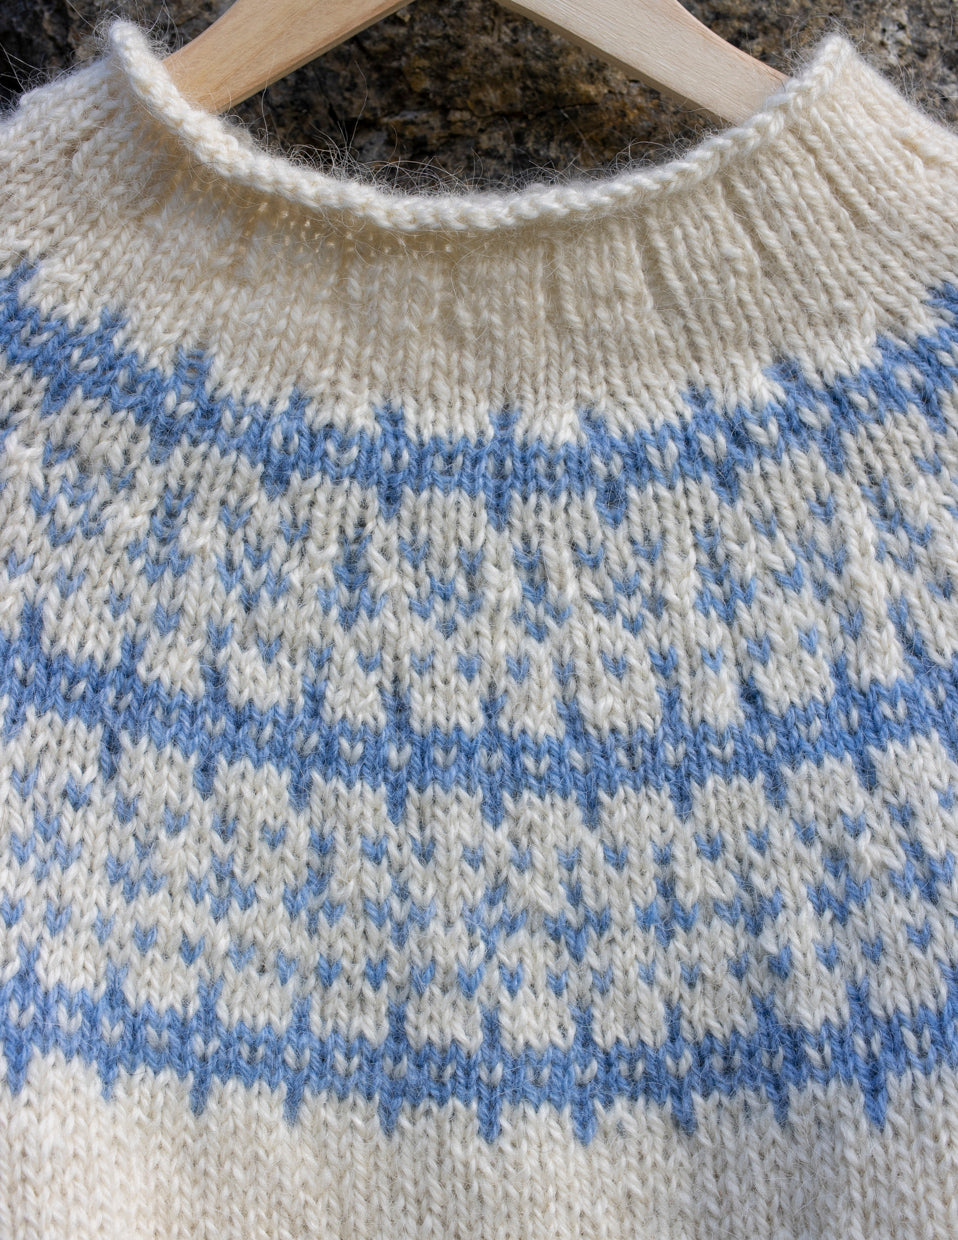 SALTY GRAINS, warm and cozy sweater, knitting kit